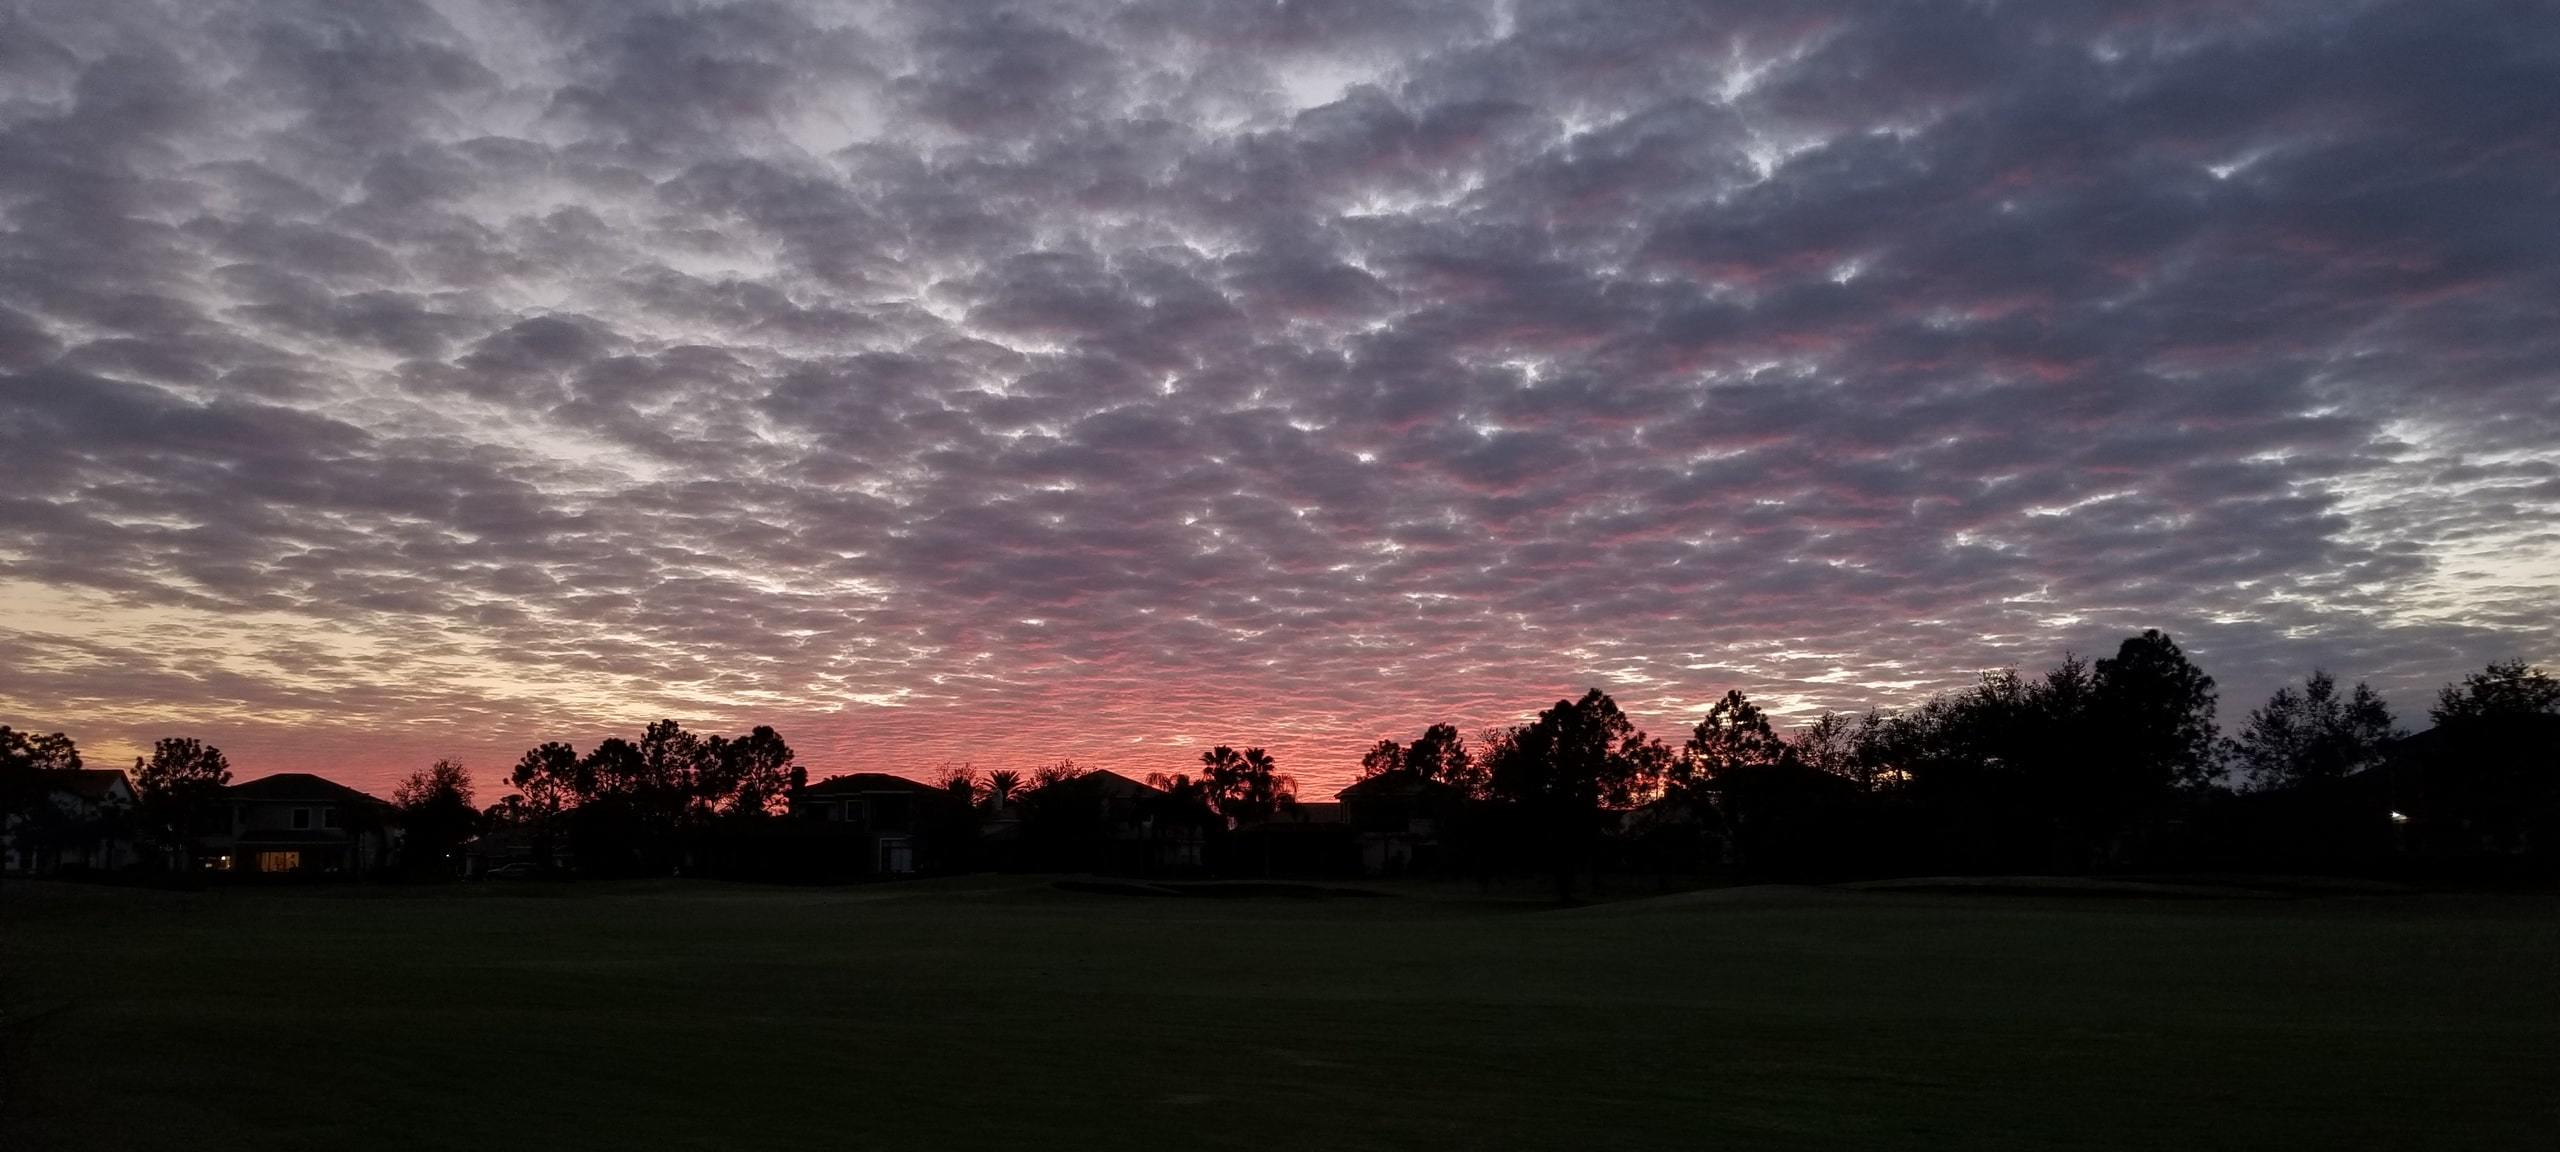 Pink sunset over Hunters Creek area golf course with silhouettes of homes